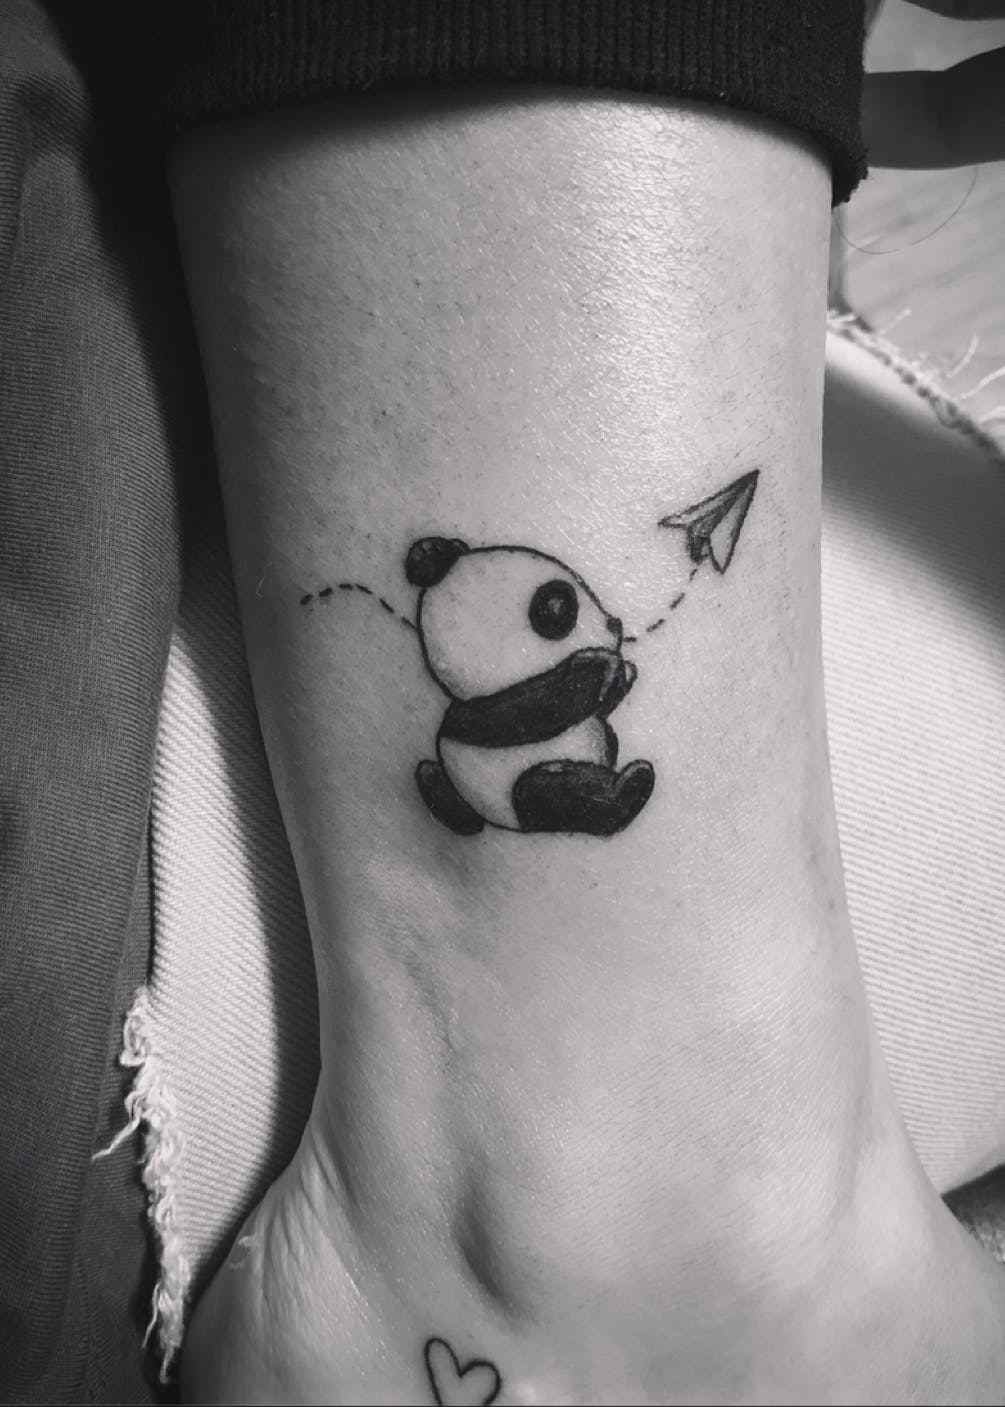 Smaller Panda plays with a paper airplane - Mini-Tattoo for the bike